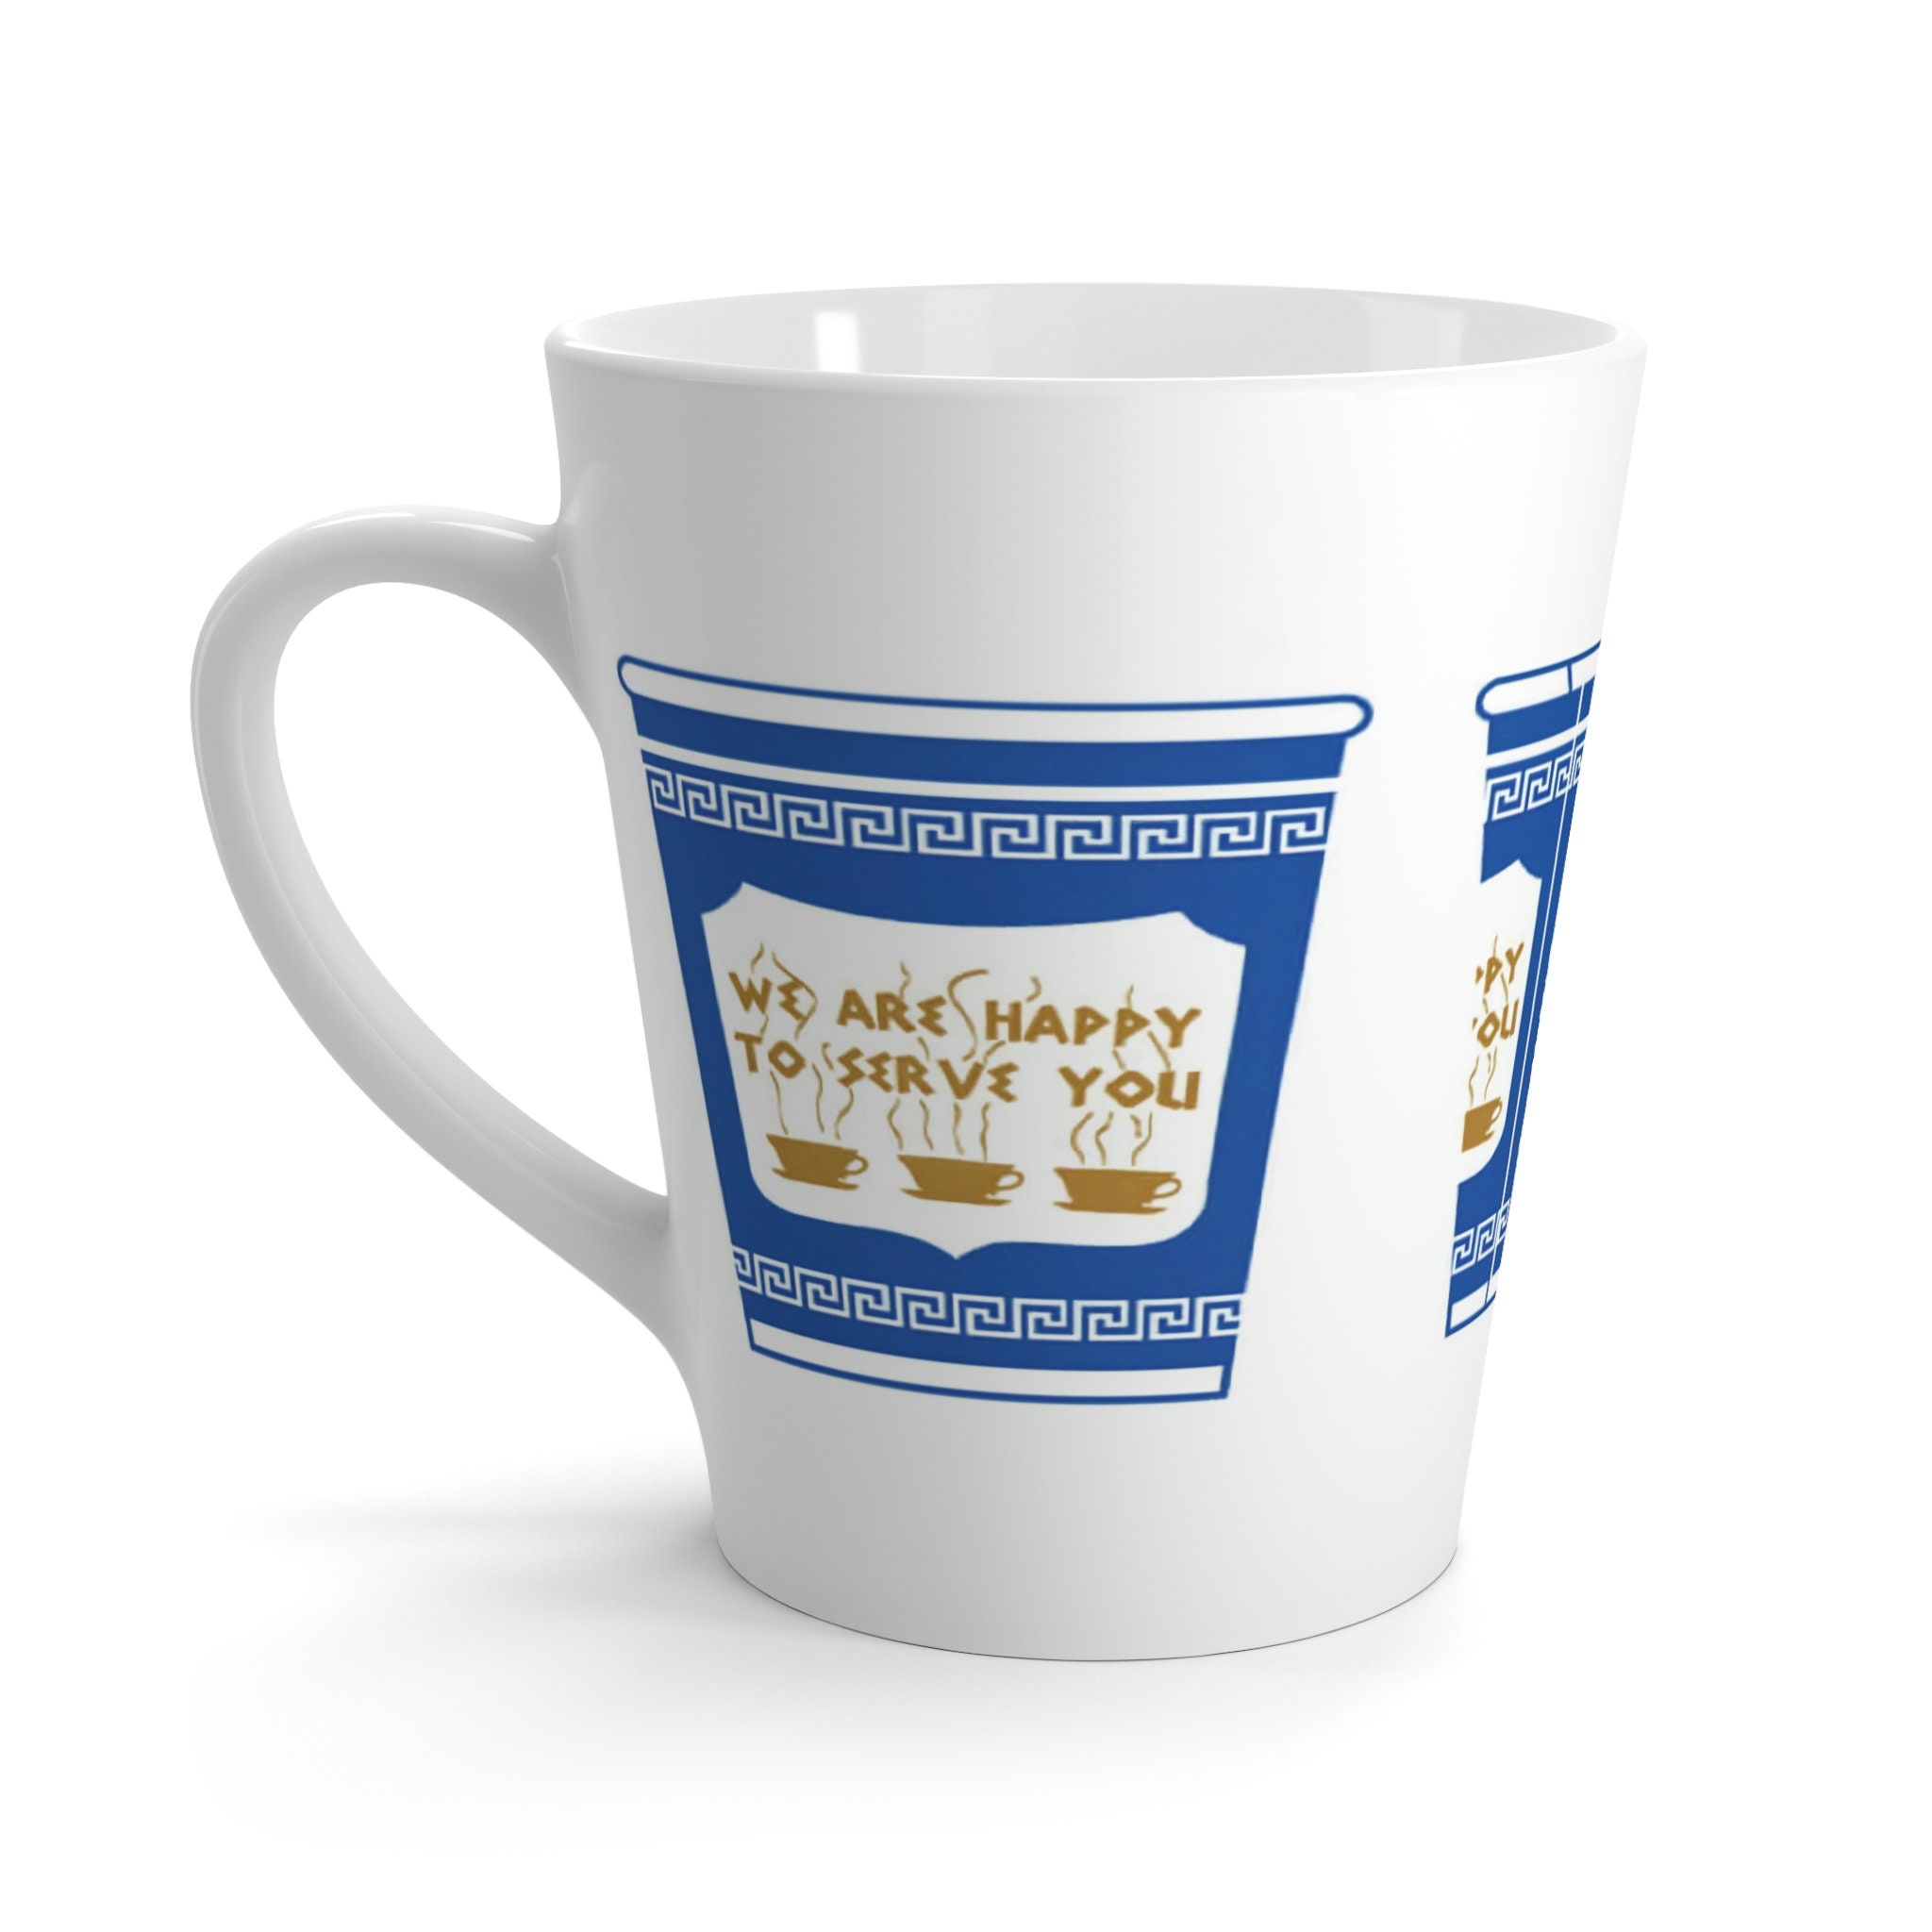 NY Coffee Cup we Are Happy to Serve You Art Print New York City